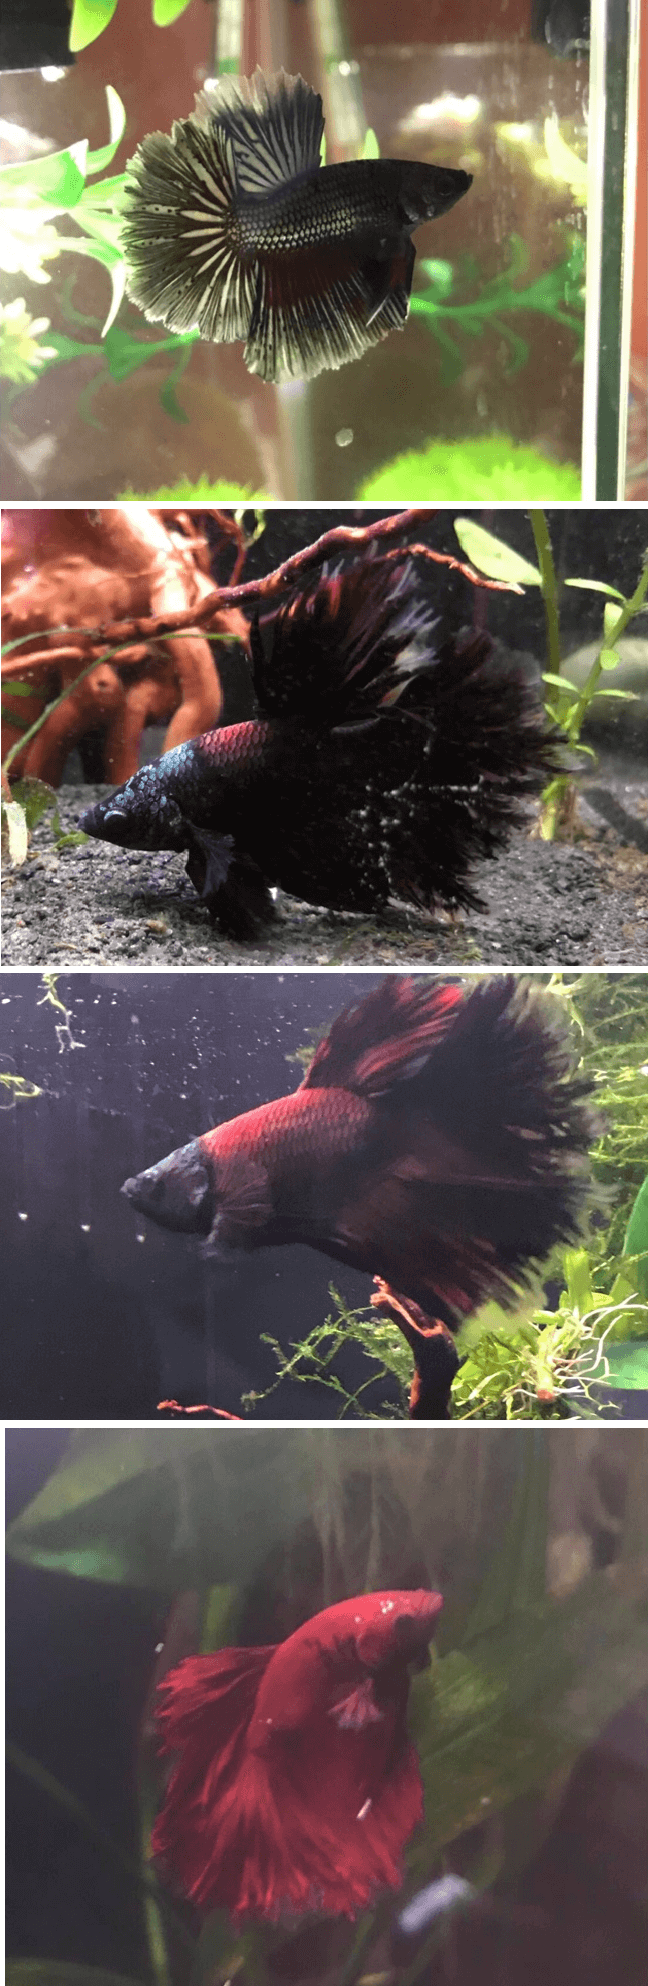 before and after a black Marble Betta dramatically changes its whole body color to red